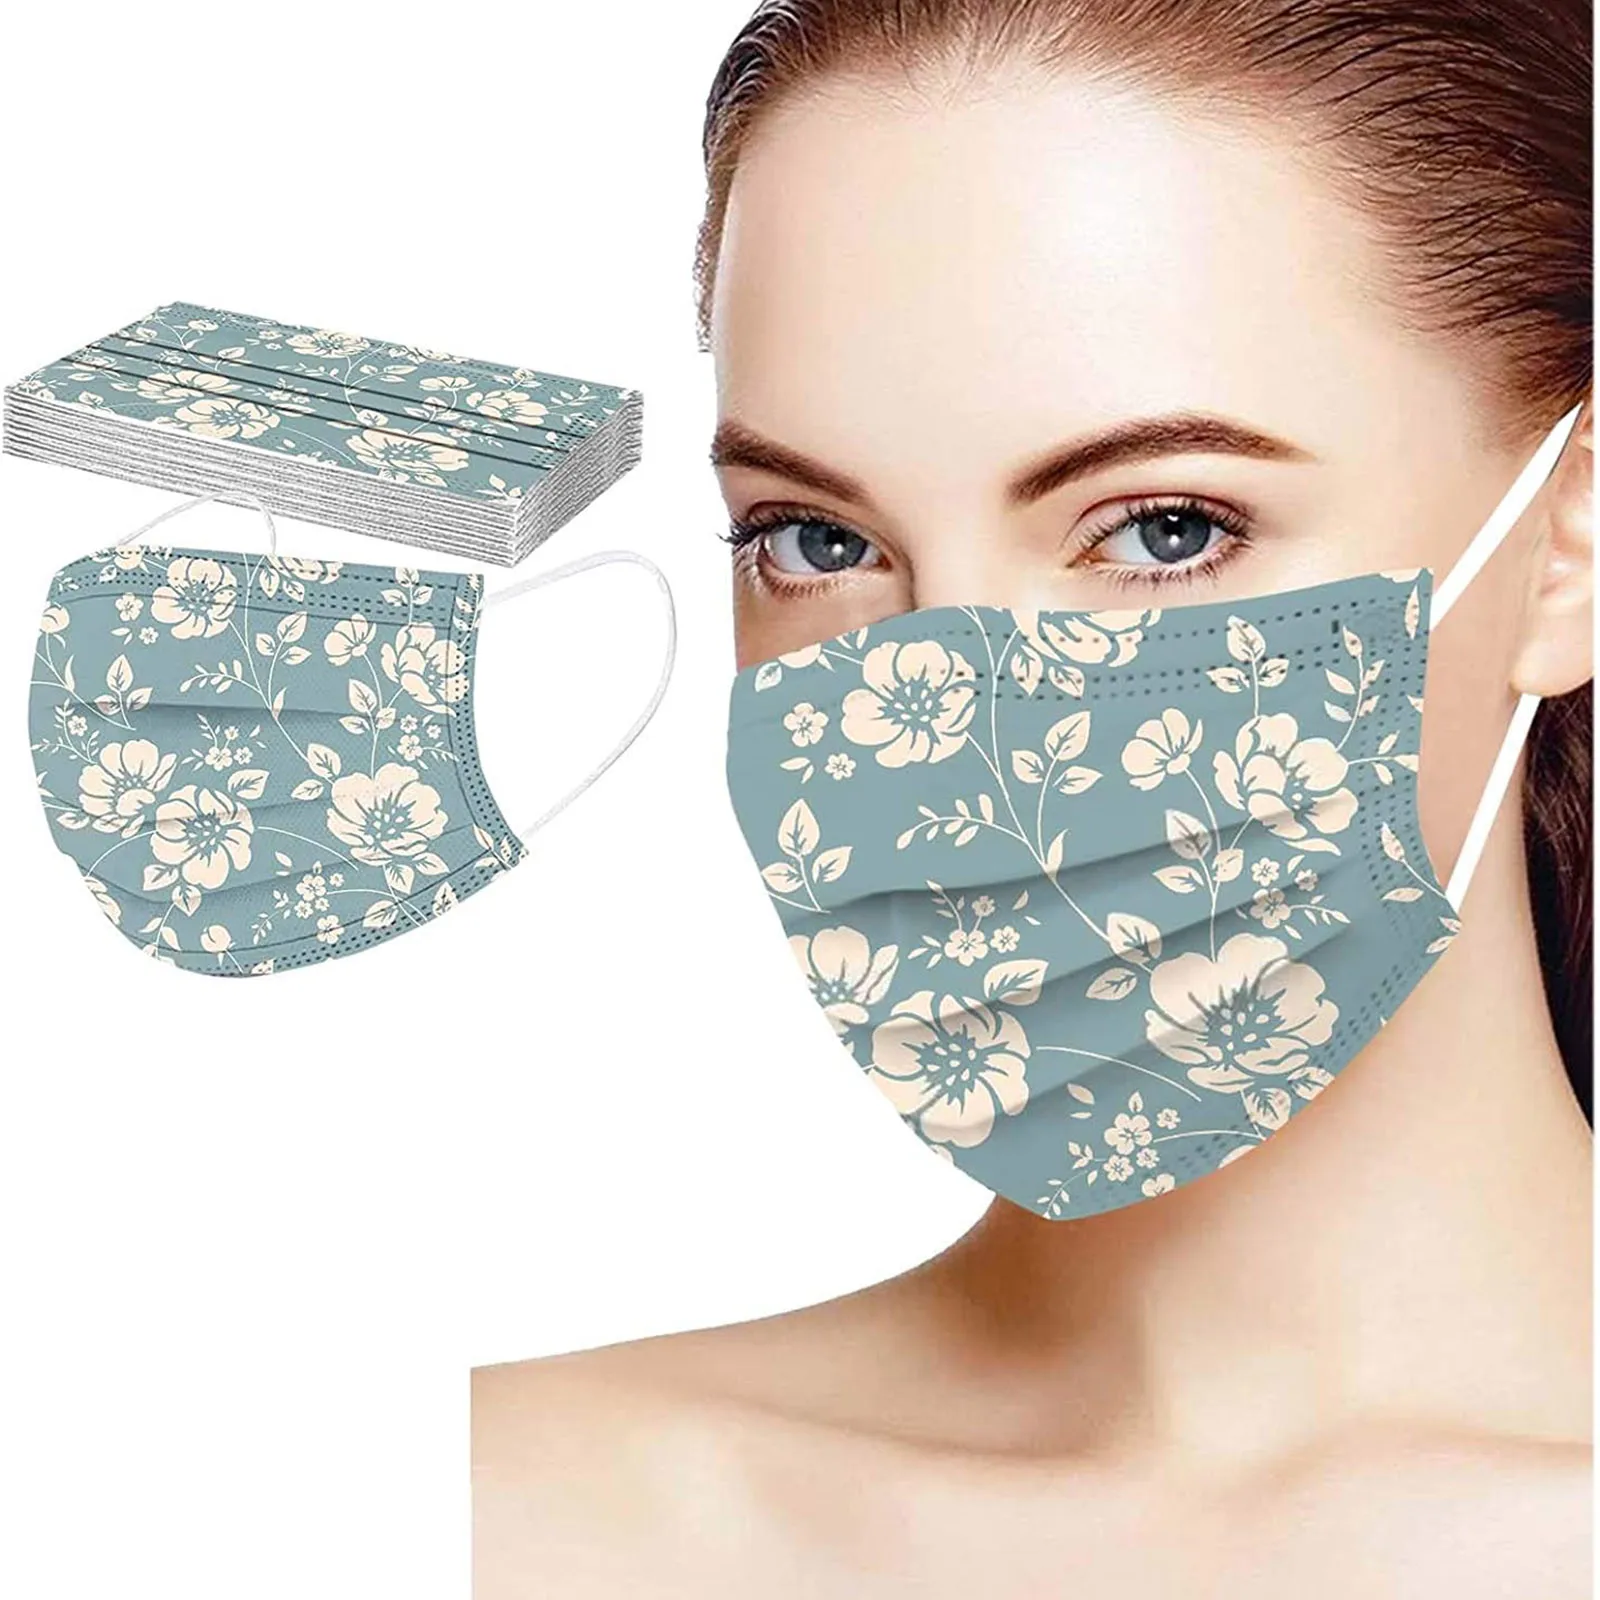 

10pcs Disposable Face Mask adult Printed Flower 3-ply Protective Masks Halloween Cosplay Navidad Маска Mascarillas Desechables